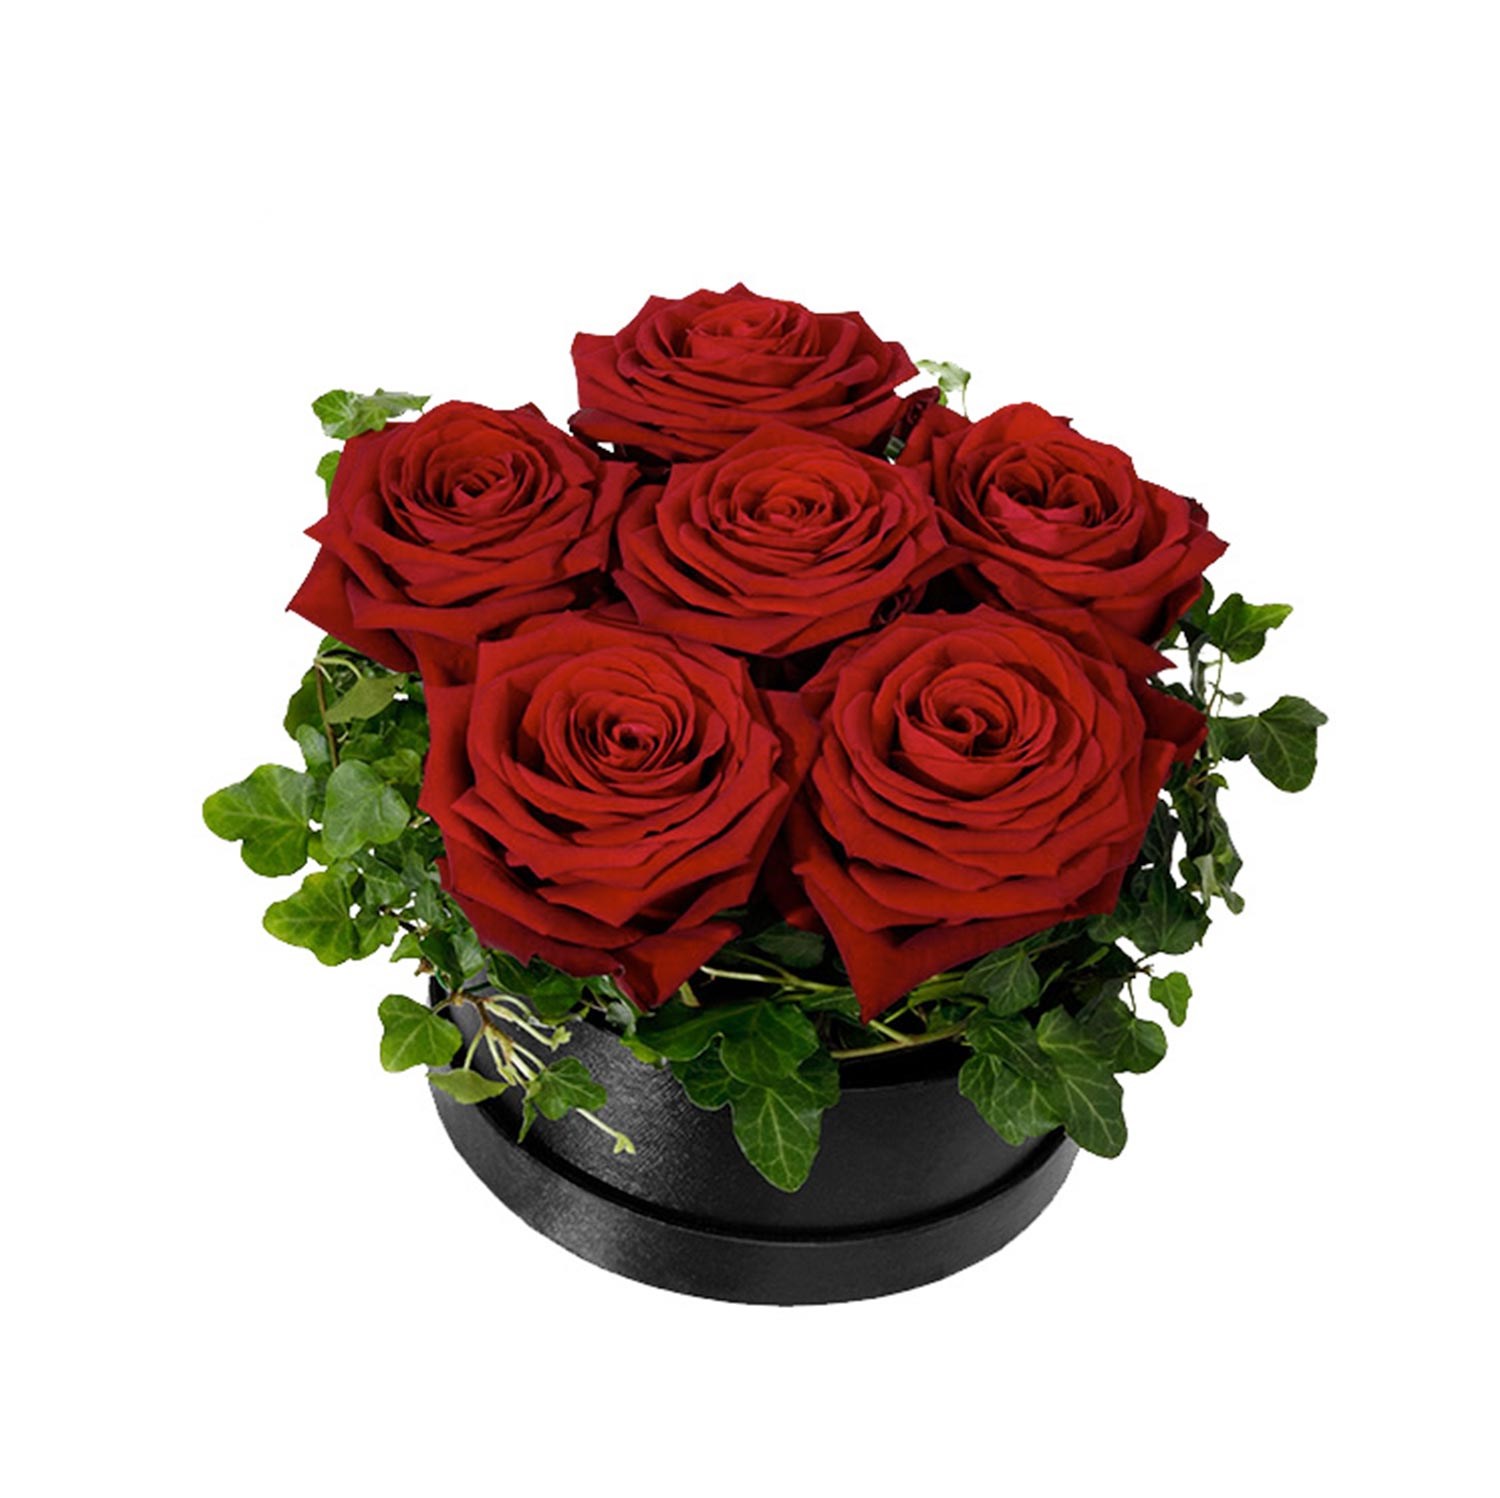 product image for Small Flower Box, Red Roses